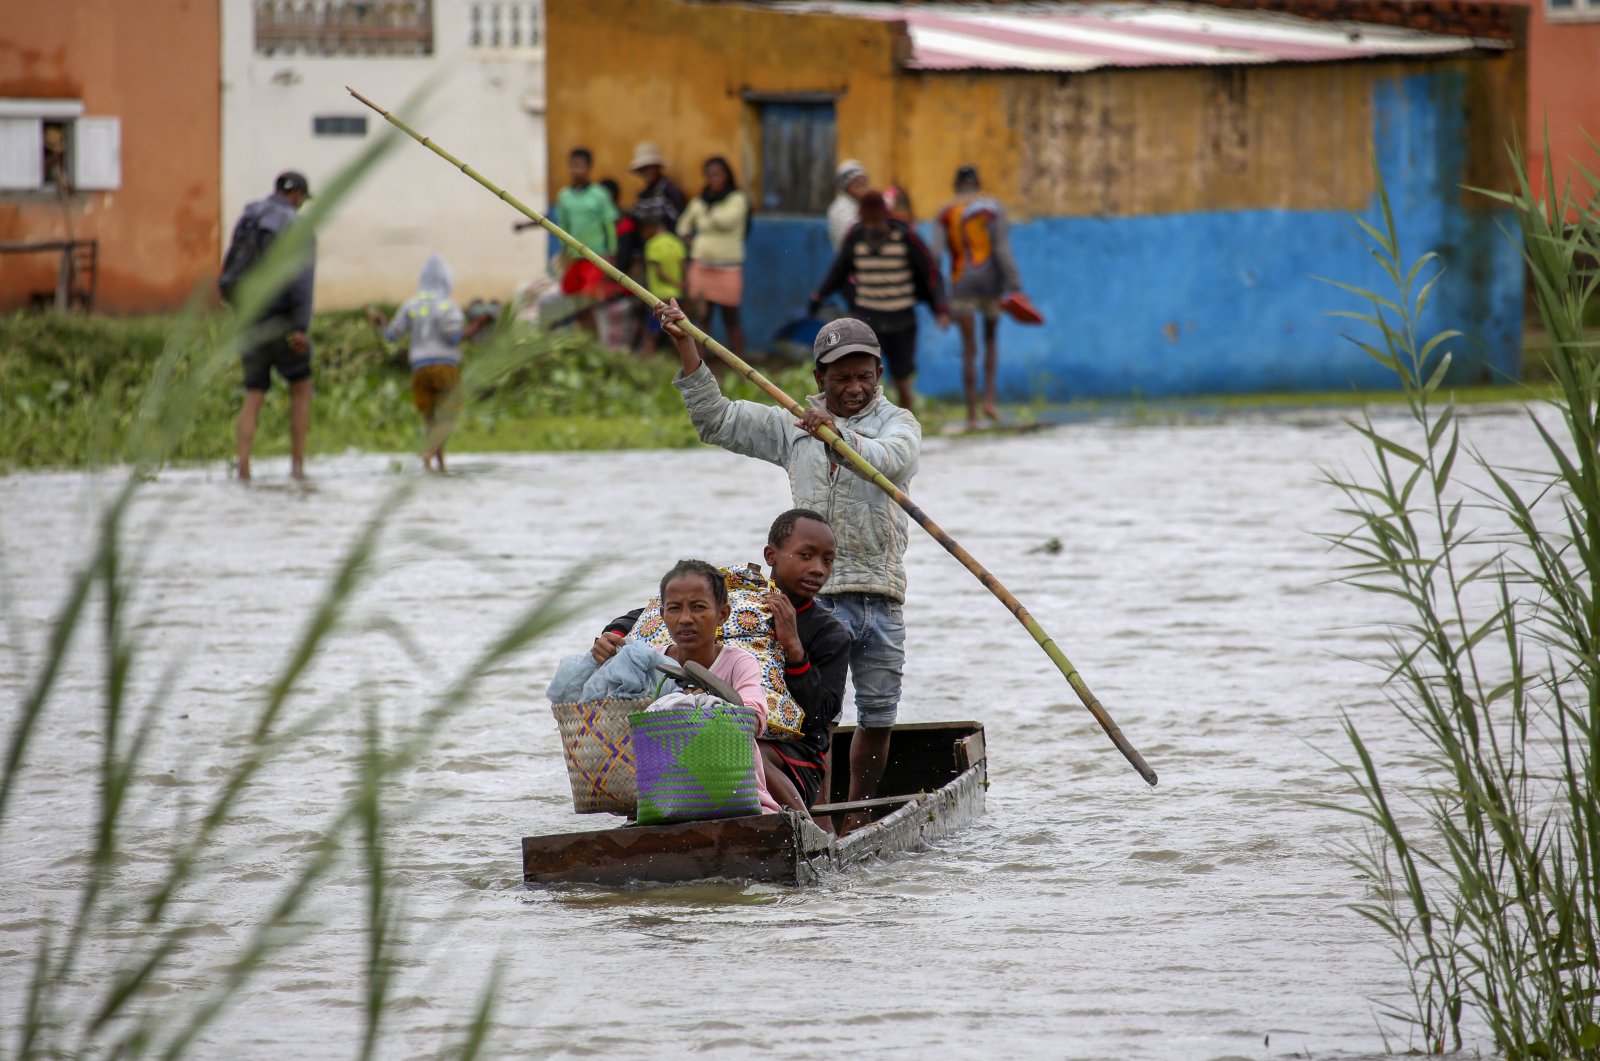 A family take their belongings after their home was flooded after a weeklong of heavy rain in Antananarivo, Madagascar, Jan. 24, 2022. (AP Photo)